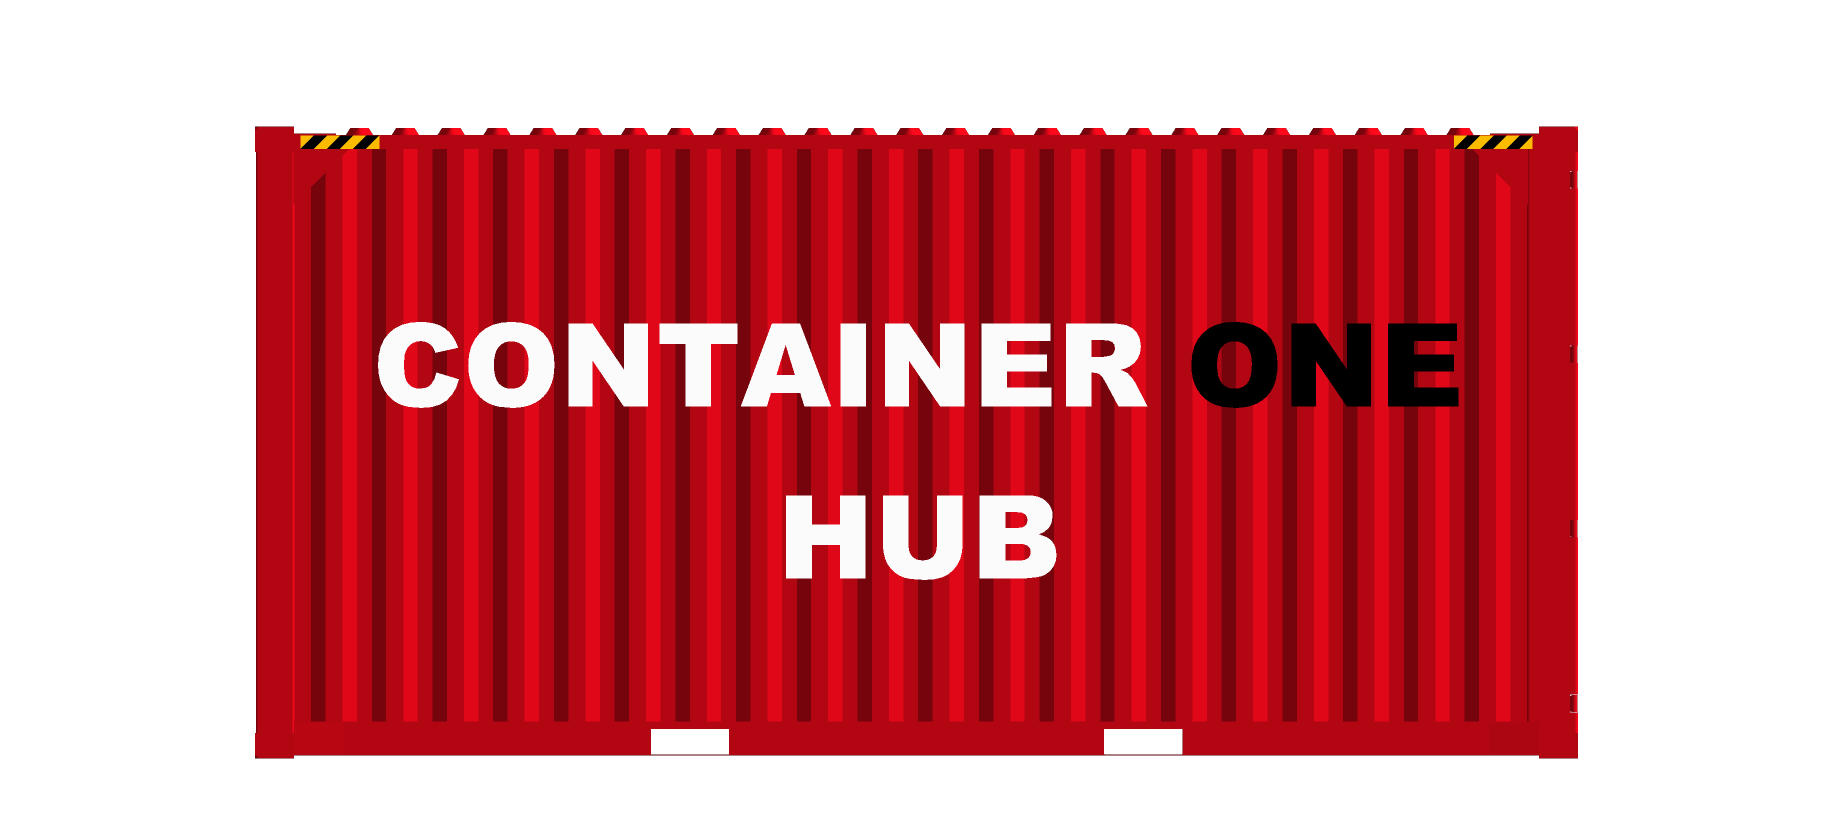 CONTAINER ONE HUB